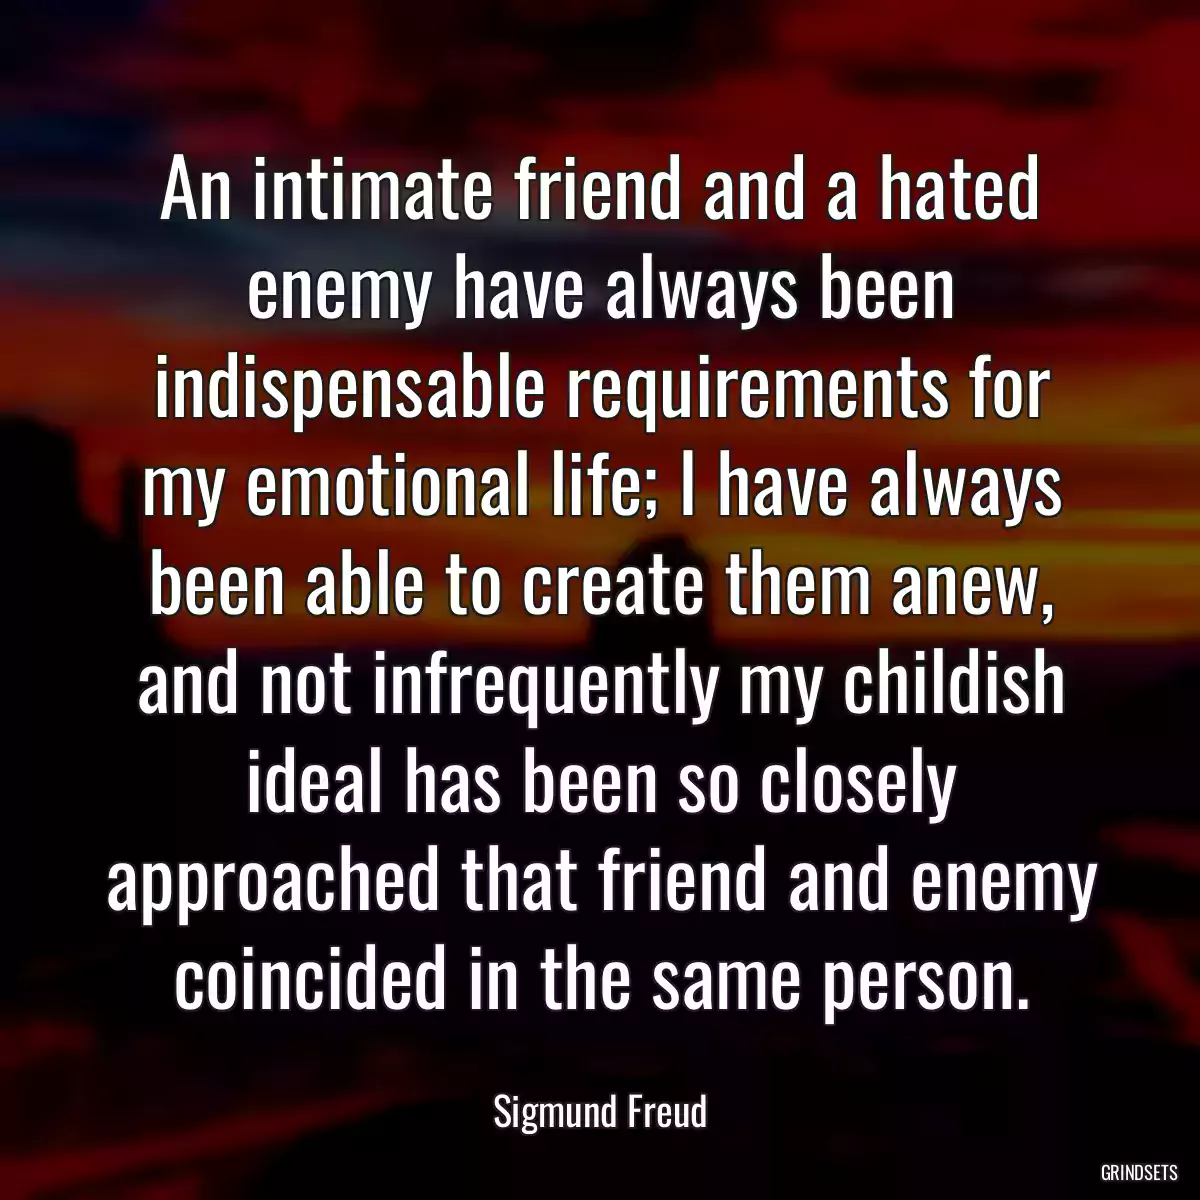 An intimate friend and a hated enemy have always been indispensable requirements for my emotional life; I have always been able to create them anew, and not infrequently my childish ideal has been so closely approached that friend and enemy coincided in the same person.